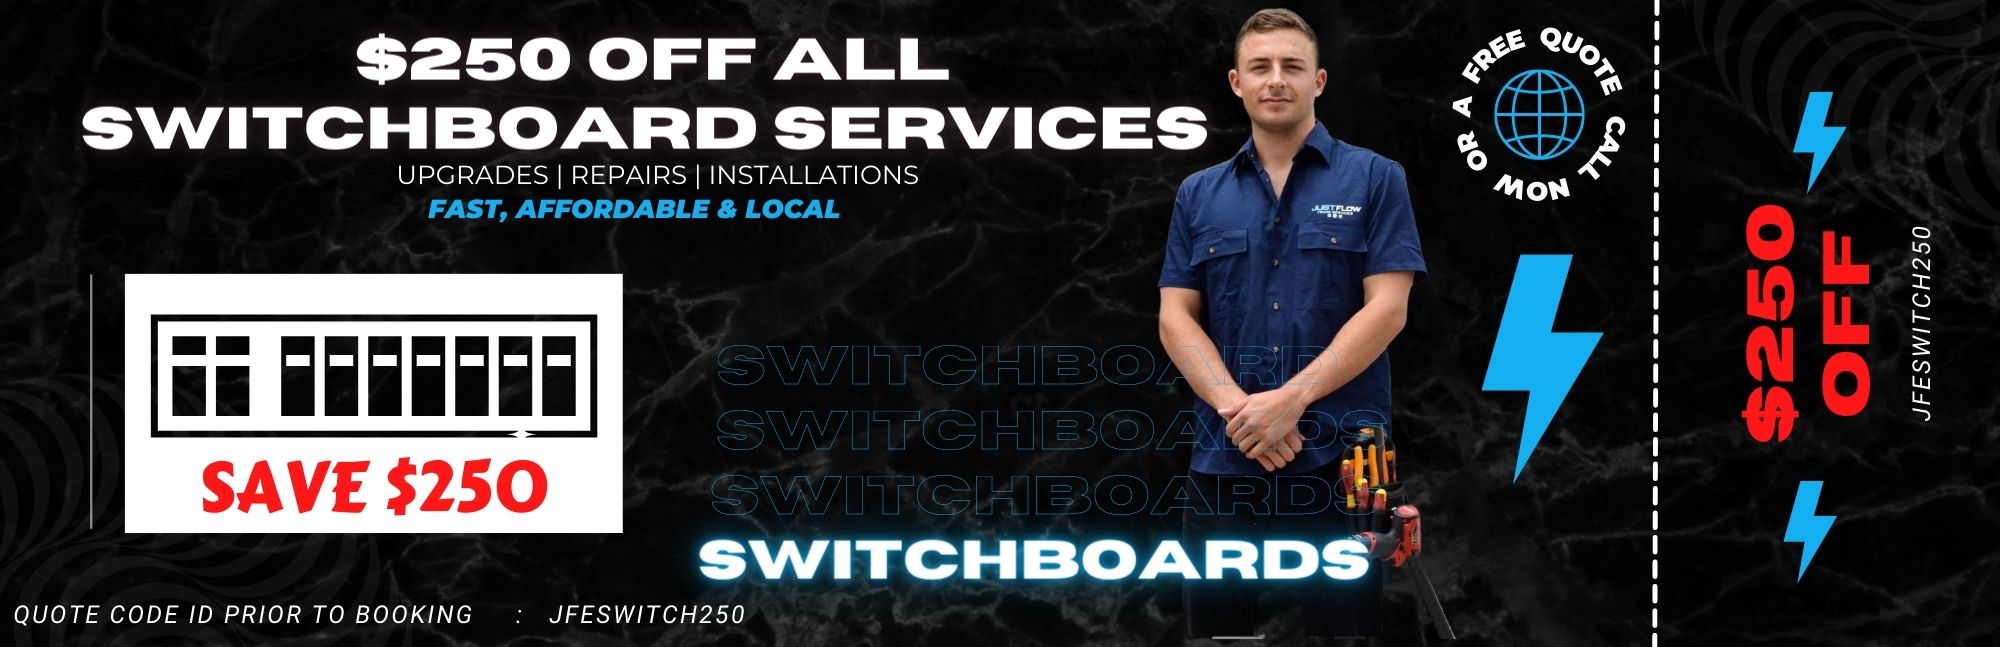 $250 off Switchboard repairs upgrades installations discount